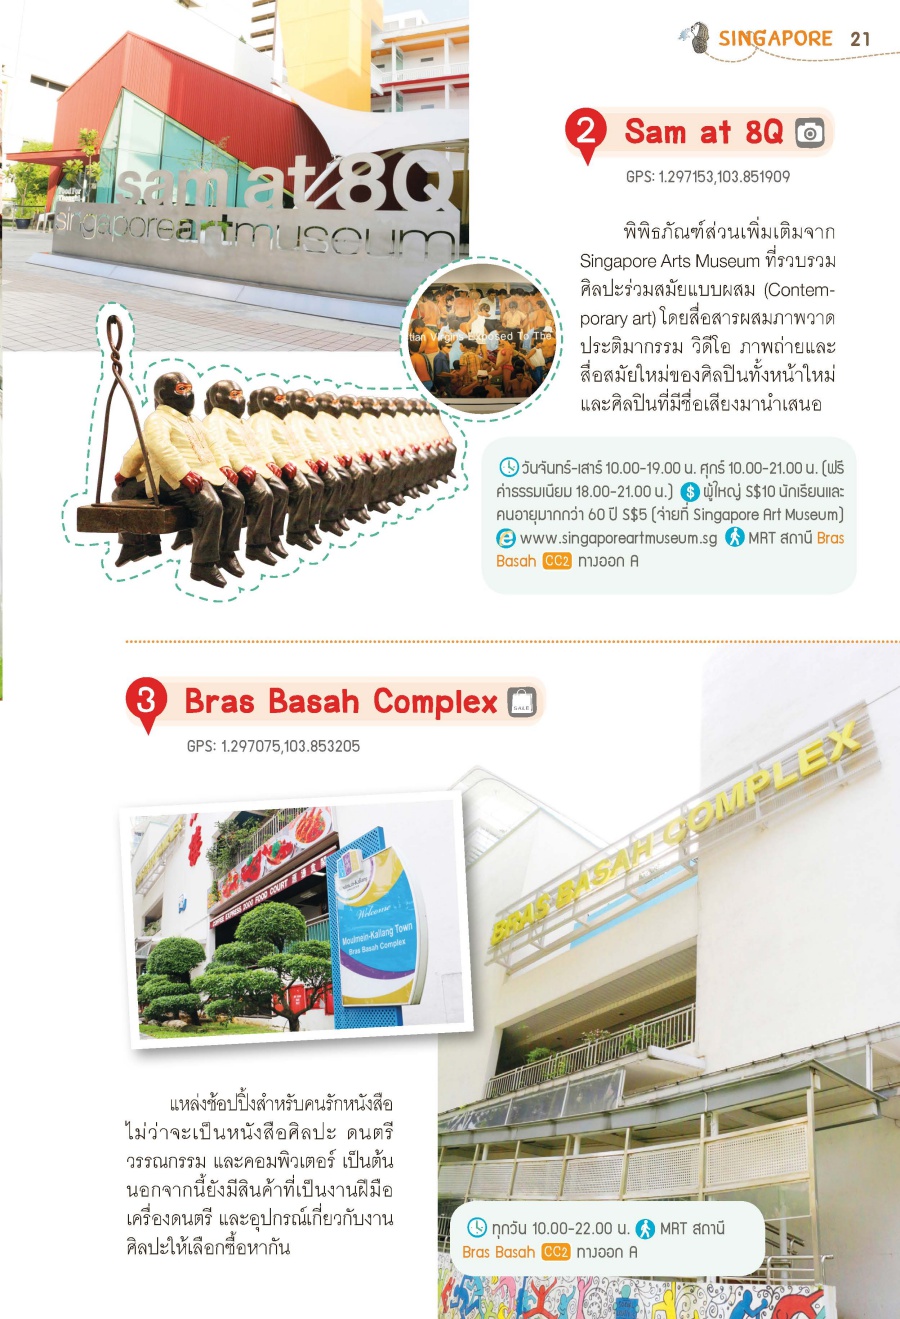 Route Singapore Page 21 